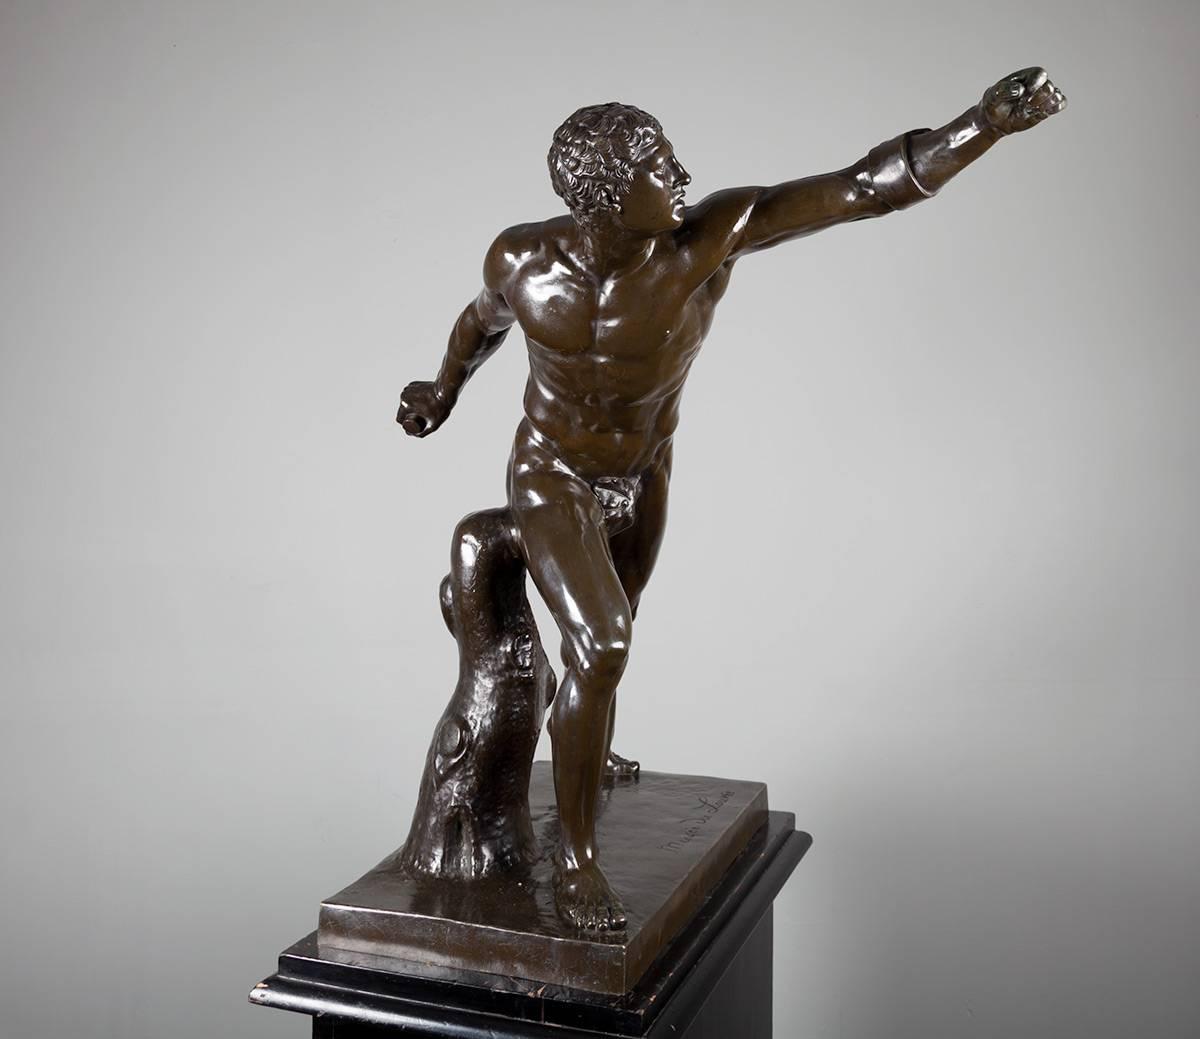 A very fine late 19th century full size bronze figure of the Borghese Gladiator.

Depicted standing nude and lunging forward by a punch-decorated tree trunk with cast inscription “Musee du Louvre” to the rectangular base.

The famous original